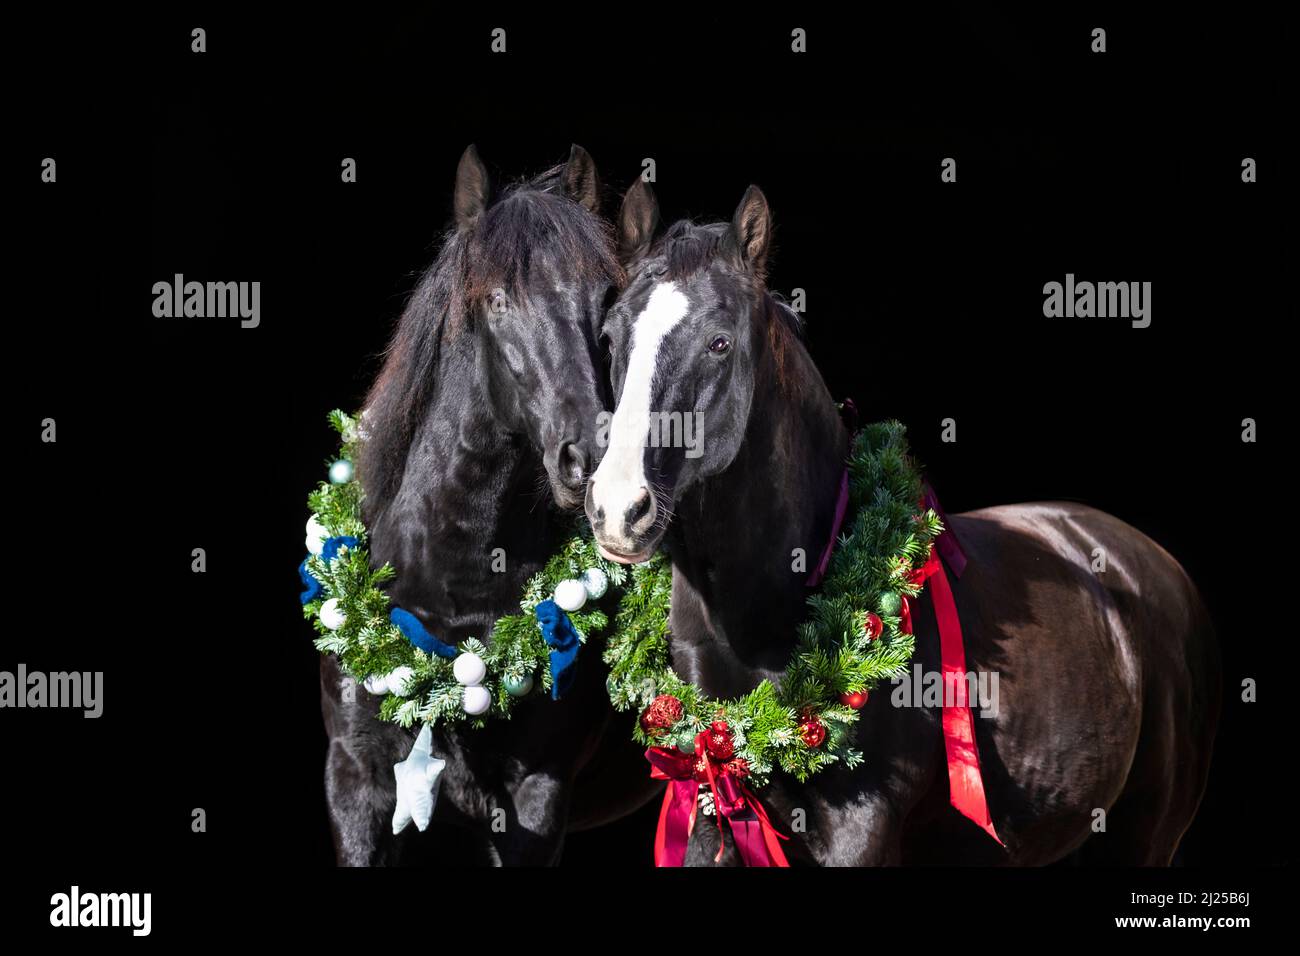 Oldenburg Horse and Pure Spanish Horse, Andalusian. Portrait of a two black horses wearing Christmas wreaths, seen against black background Stock Photo